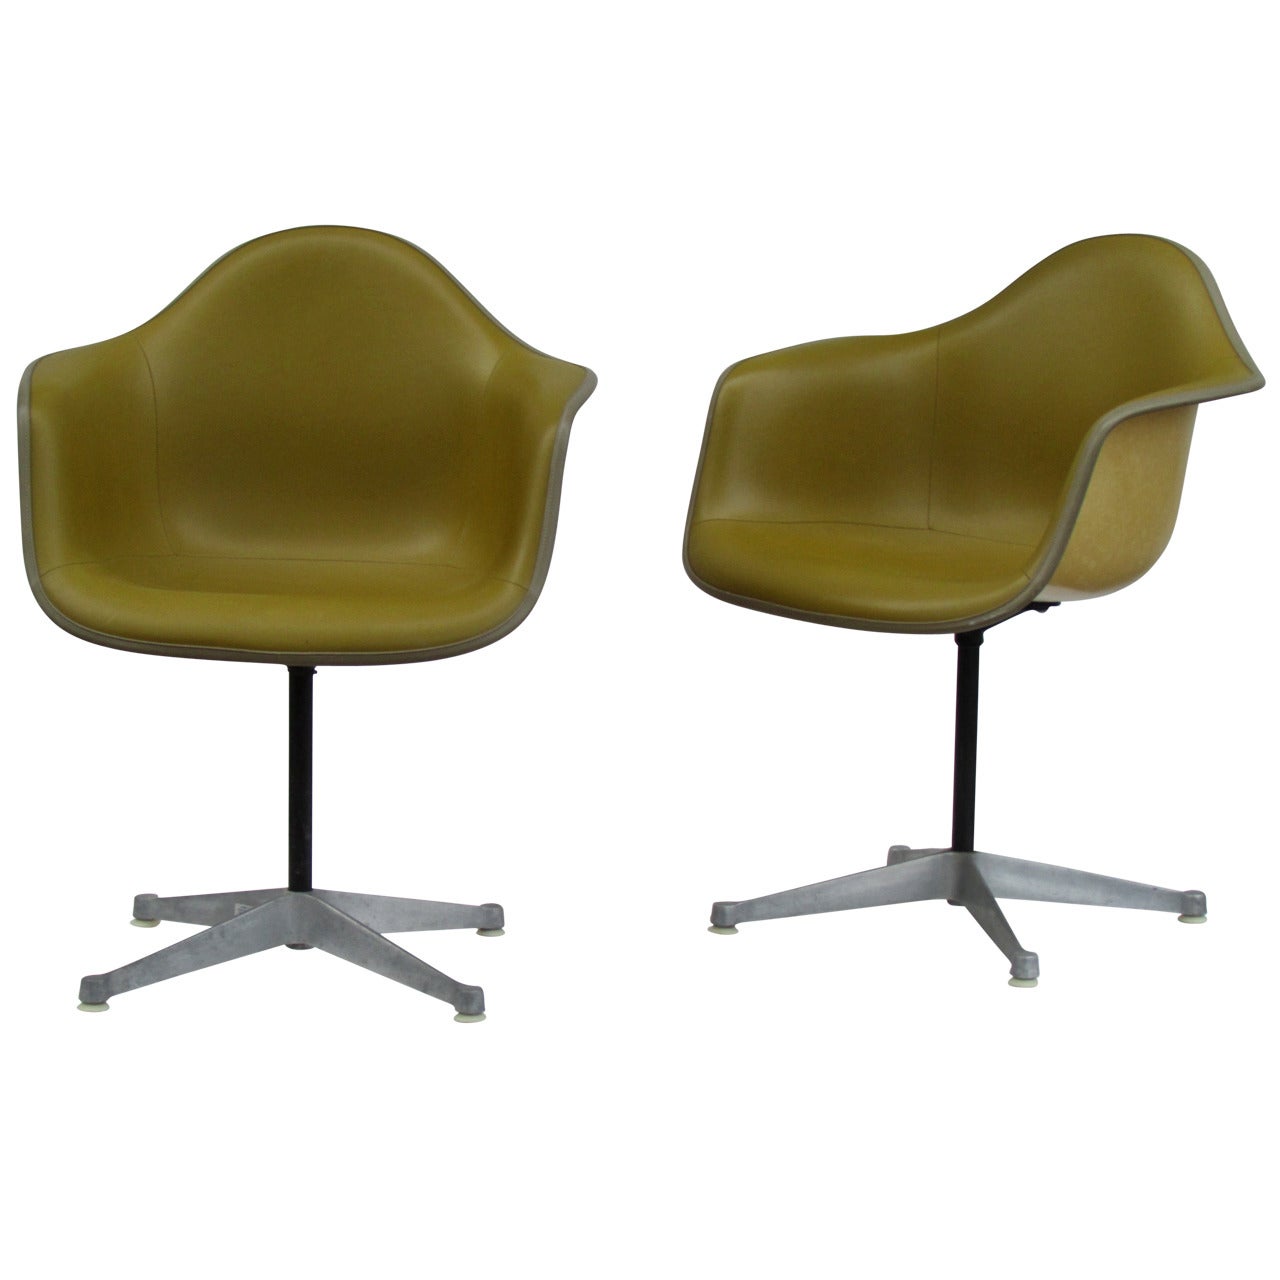 Eames Bucket Swivel Chairs in Alexander Girard Olive Chartreuse Naugahyde